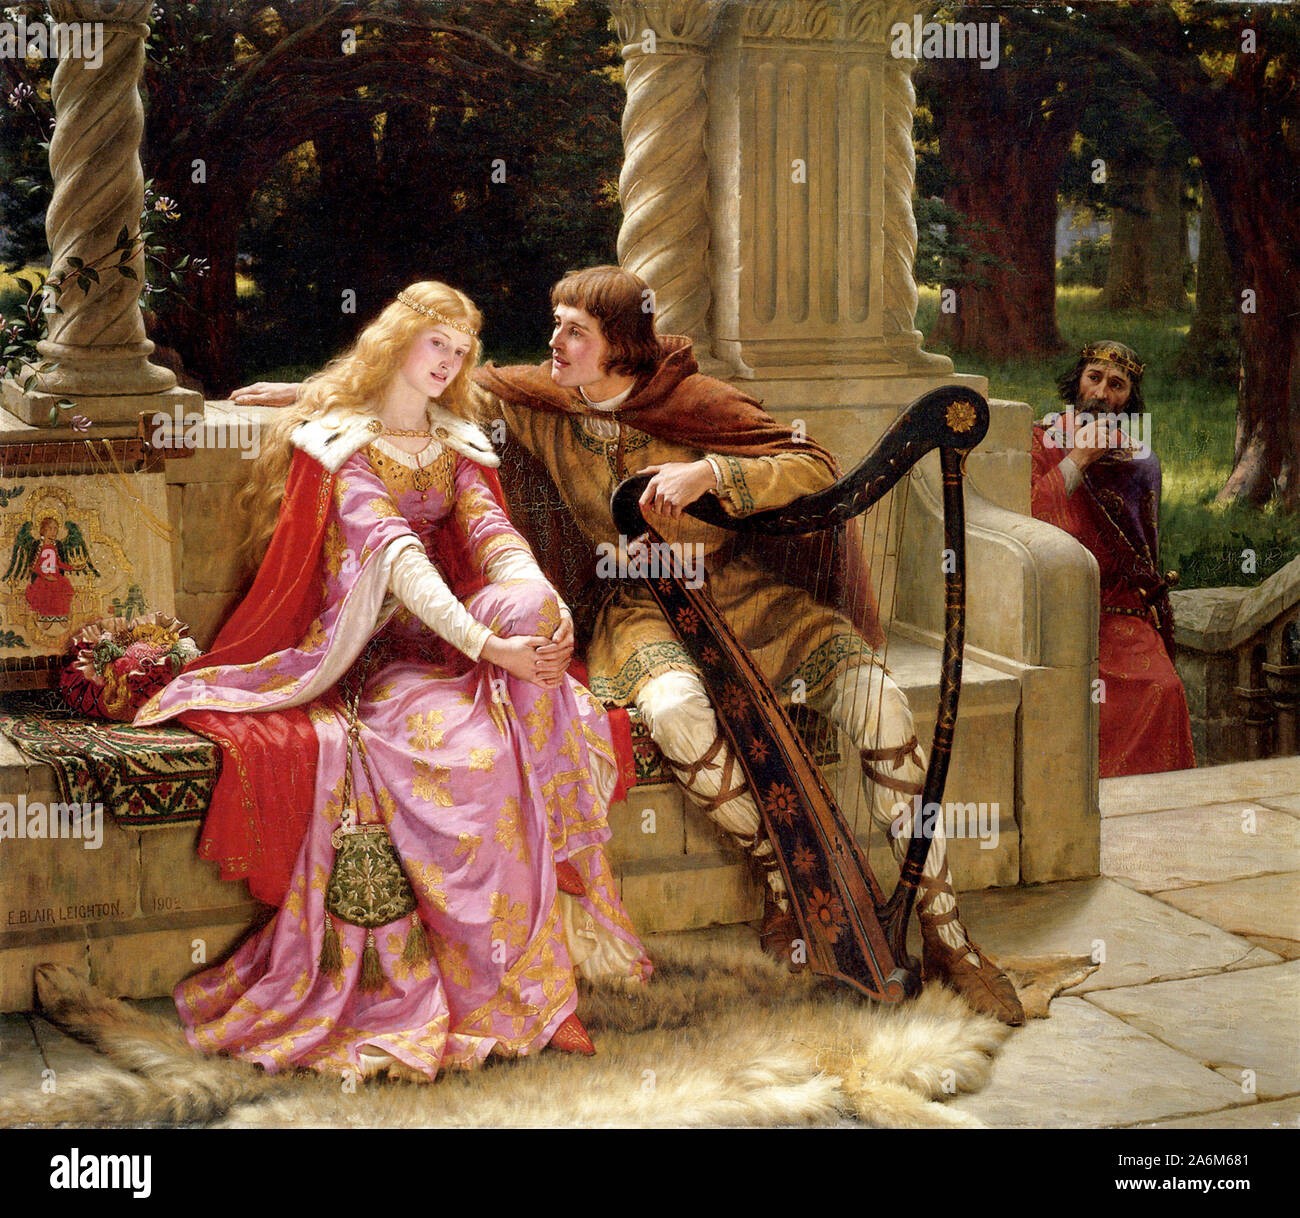 Tristan, Iseult and Mark in The End of the Song by Edmund Leighton. Tristan and Iseult, romance story, tragedy about the adulterous love between the Cornish knight Tristan, Tristram and the Irish princess Iseult, Isolde, Yseult. Stock Photo